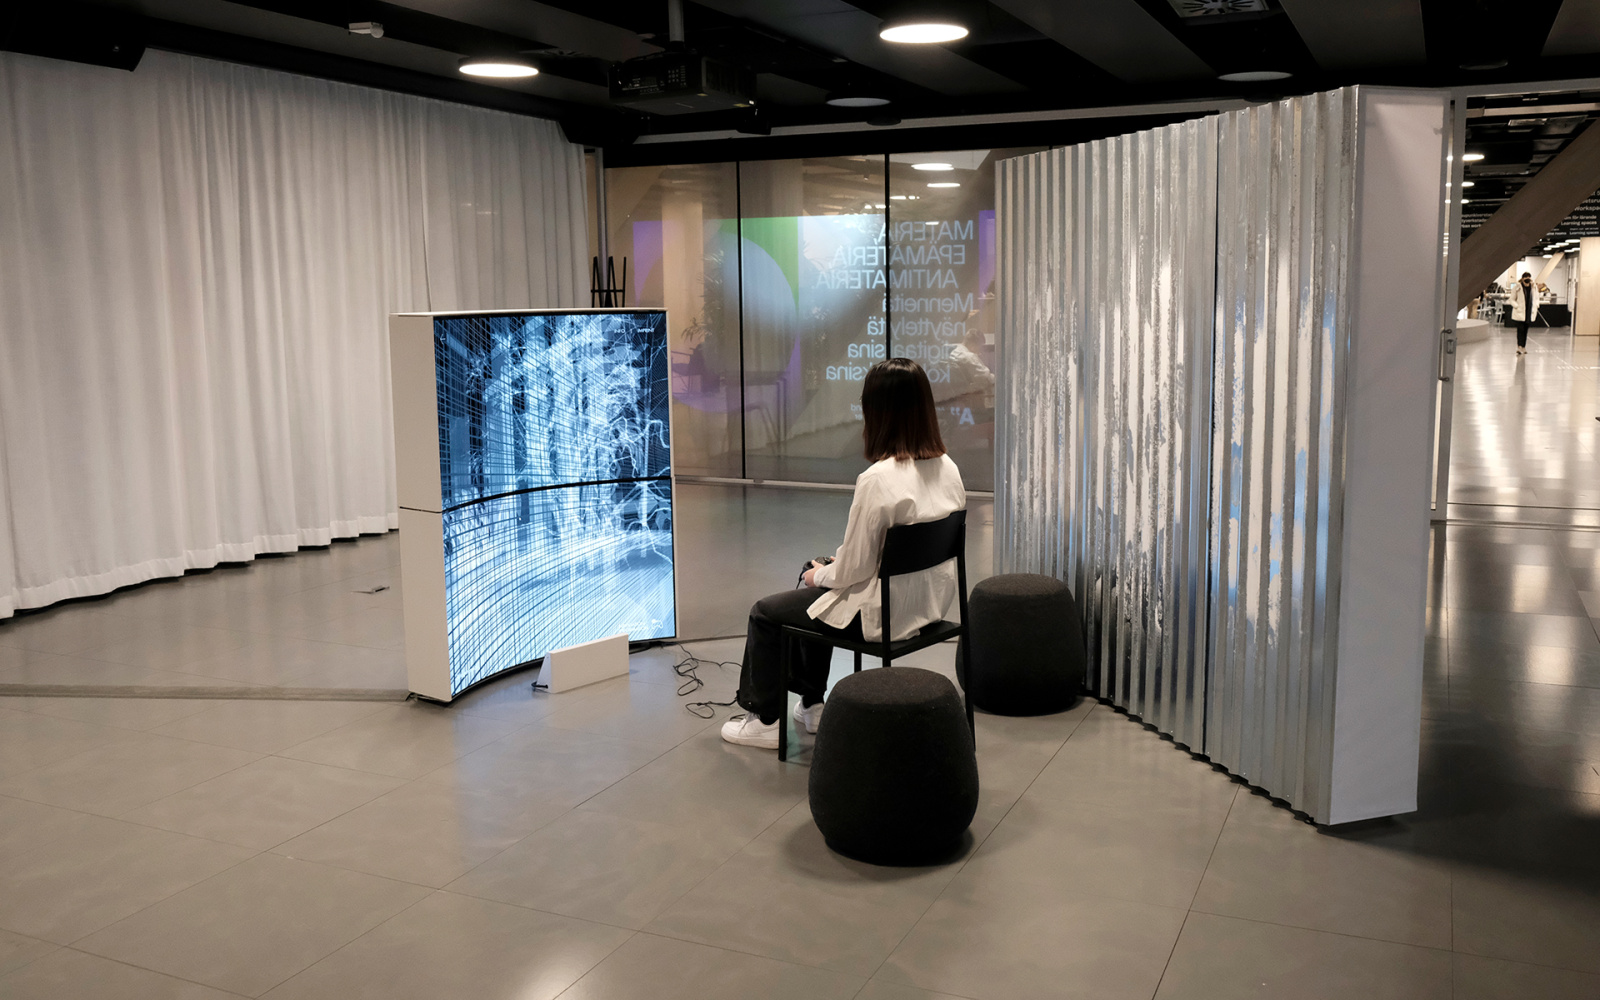 You can see a person sitting in front of an immaterial display. 